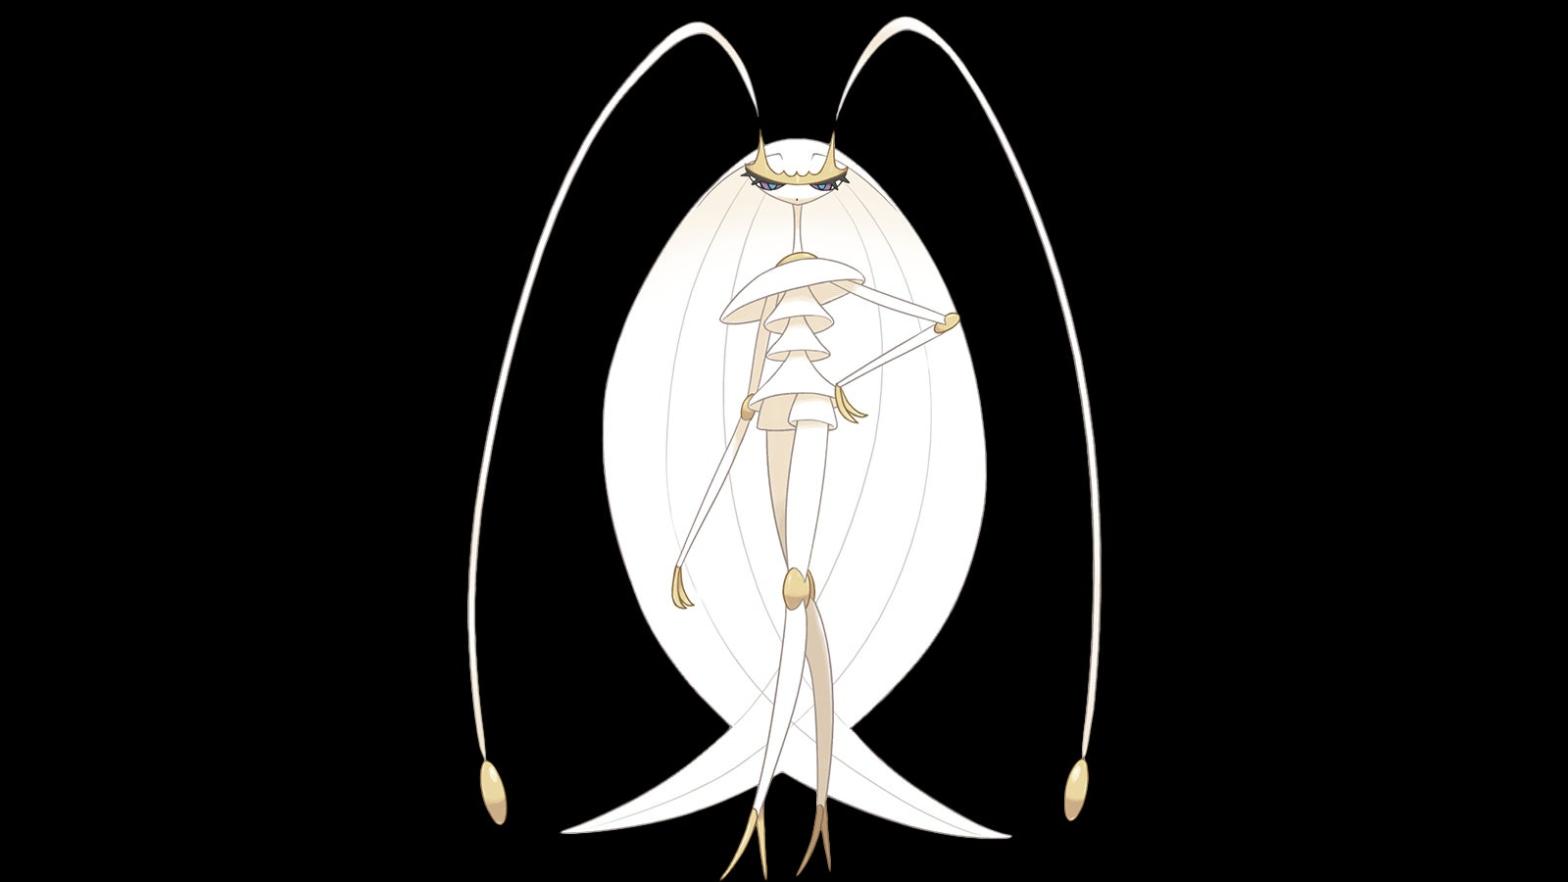 Pheromosa is also known as UB-02 Beauty in the games, so there's that.  (Image: The Pokemon Company)